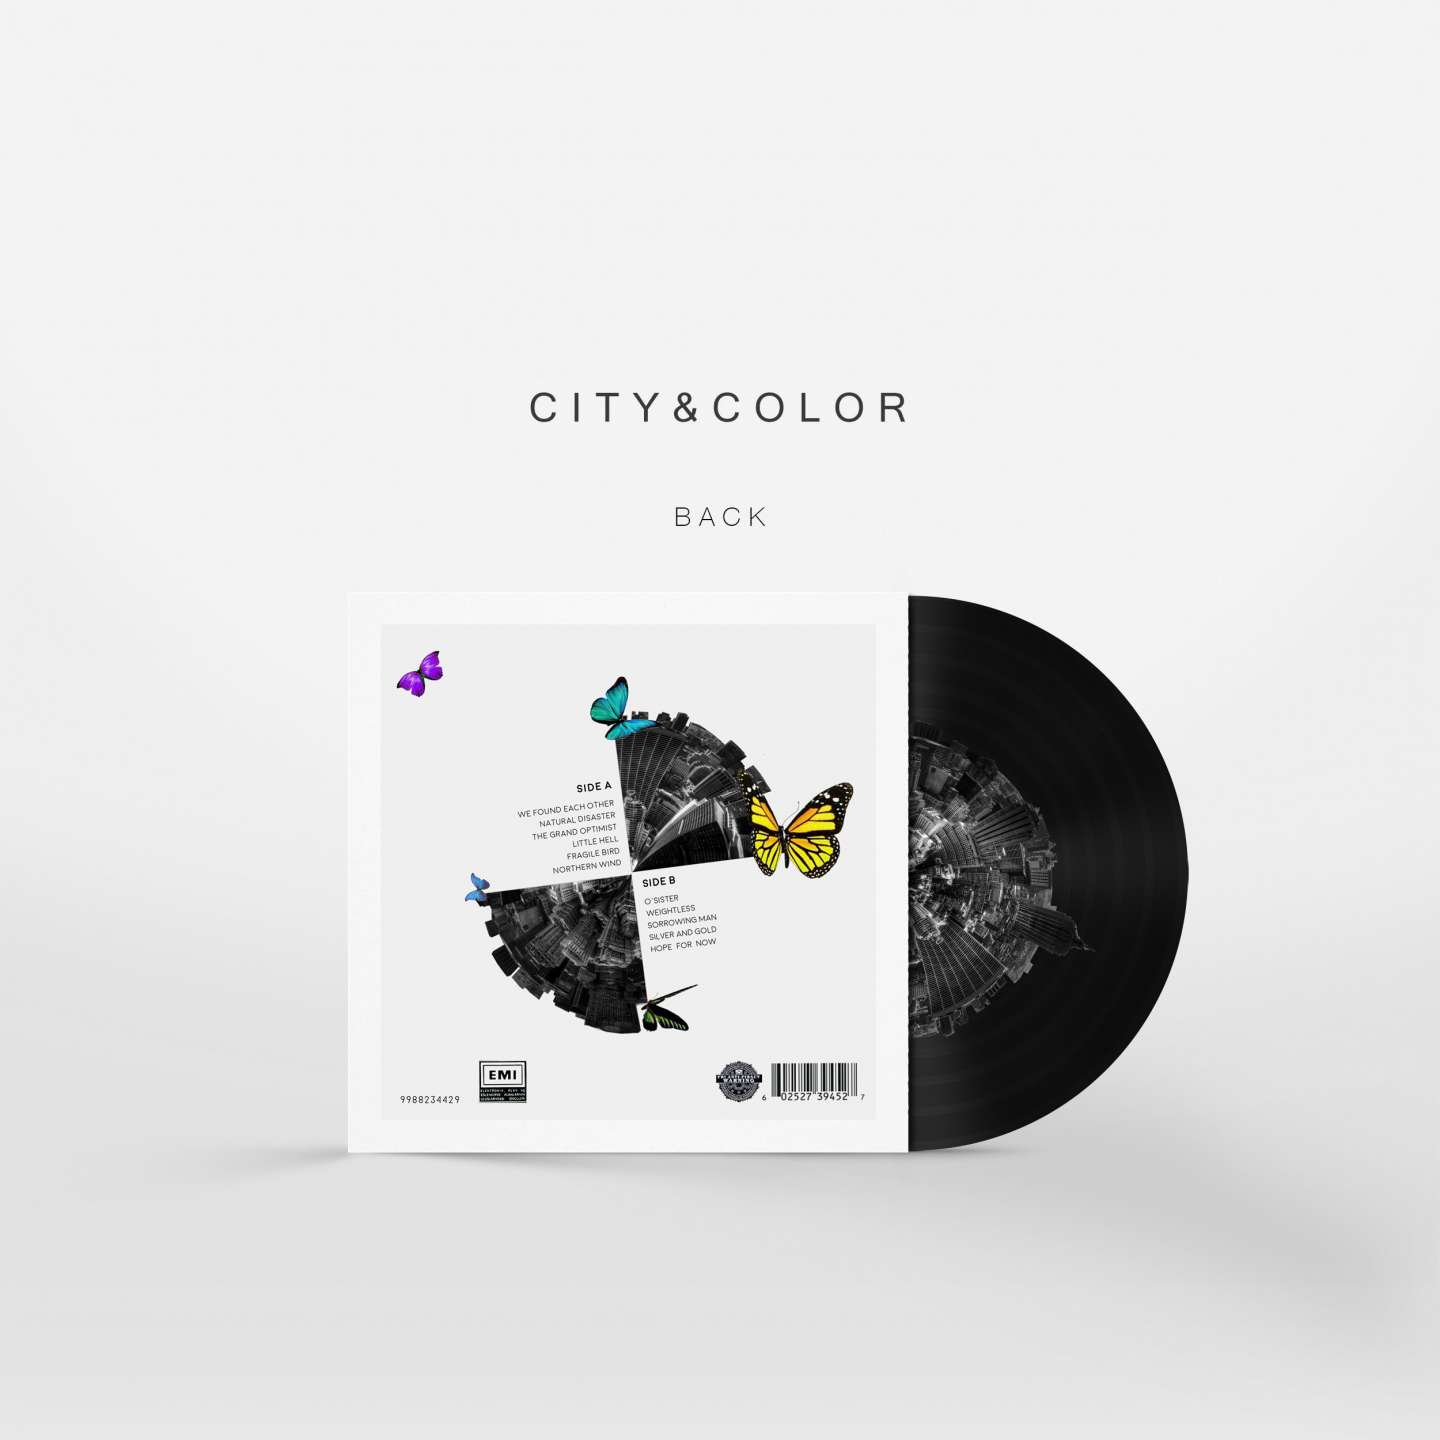 Album Cover Design - Little hell by City & Color